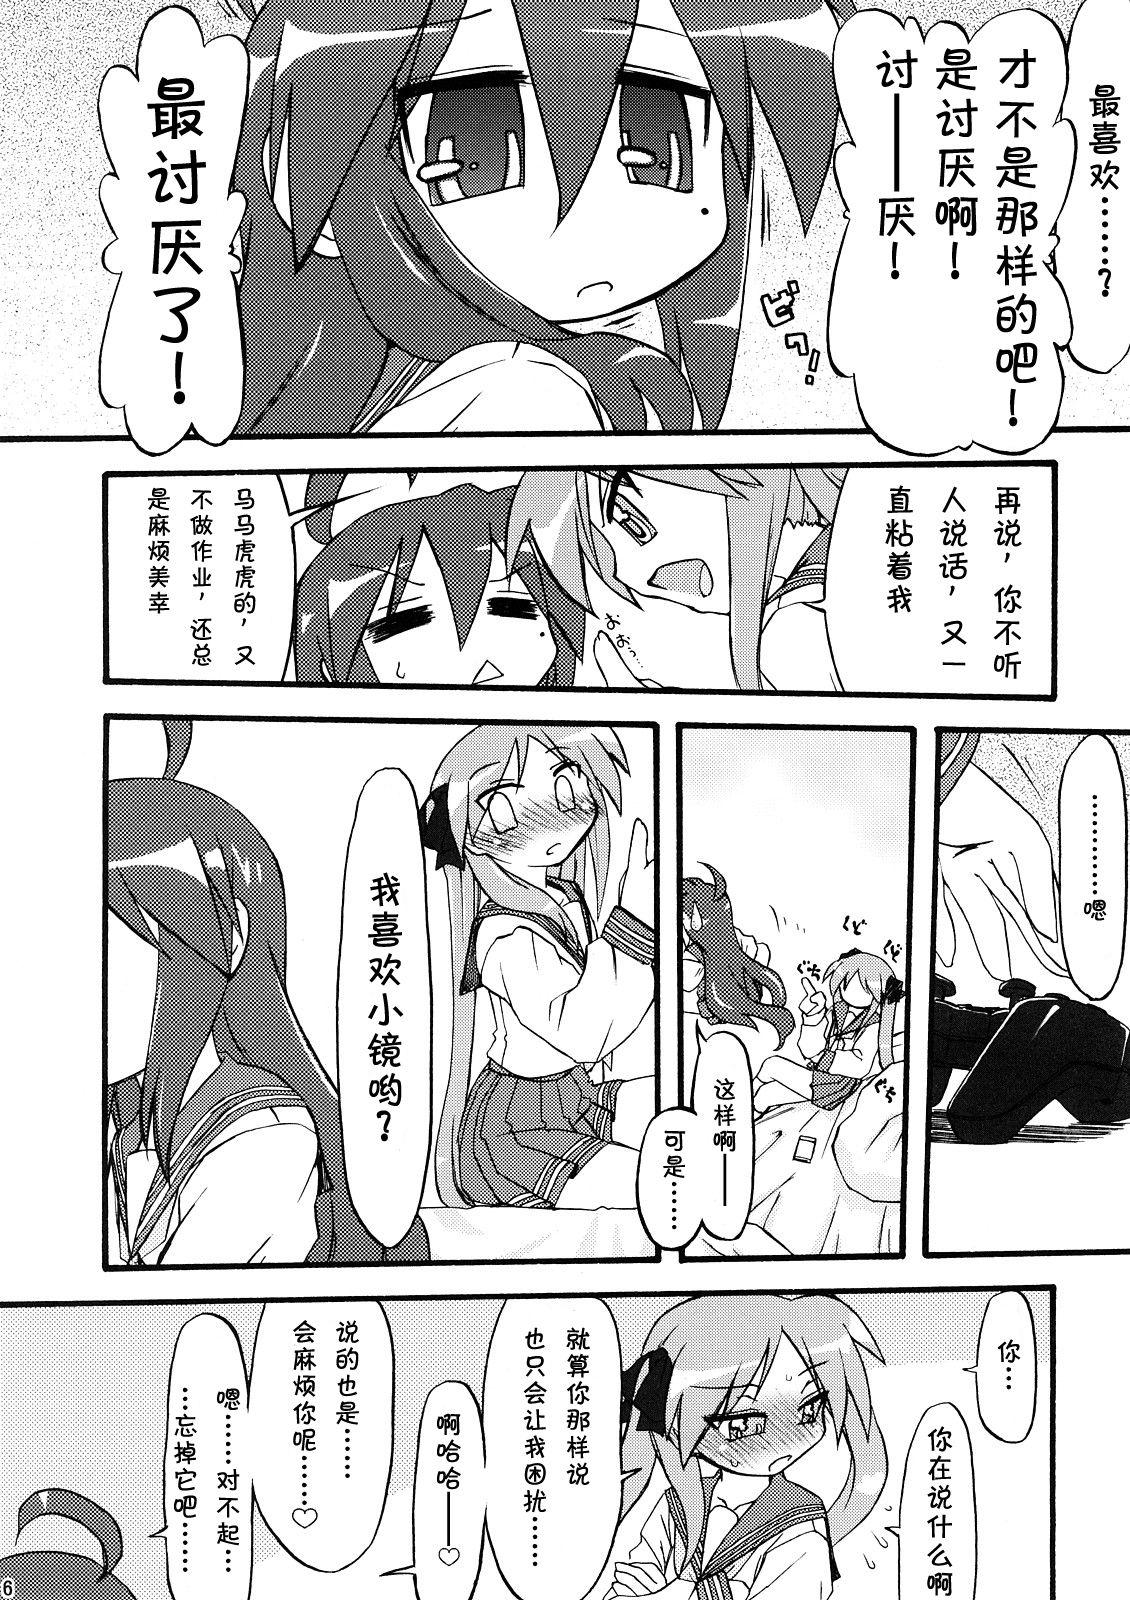 Metendo Ao Sumire - Lucky star Lovers - Page 5